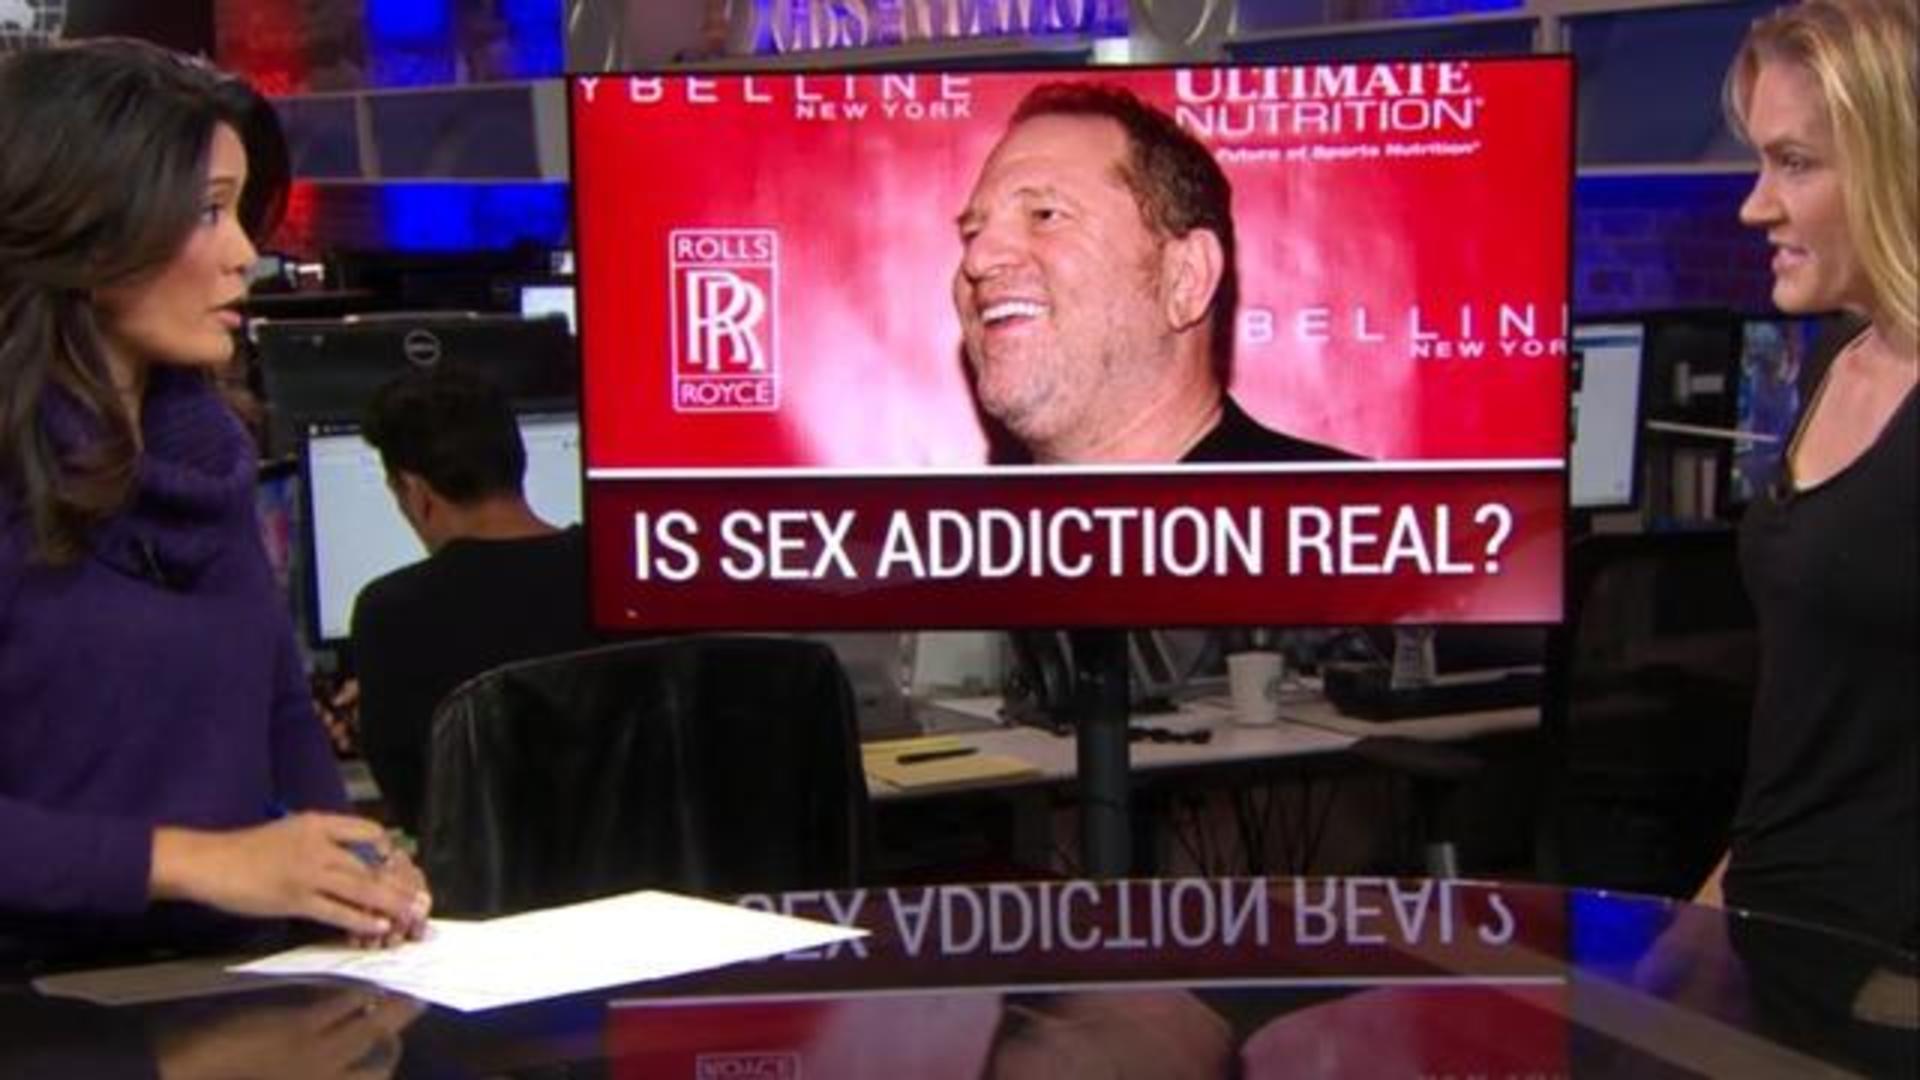 Hosto Mouton Sex Video - https://www.cbsnews.com/video/nyc-officials-take-questions ...